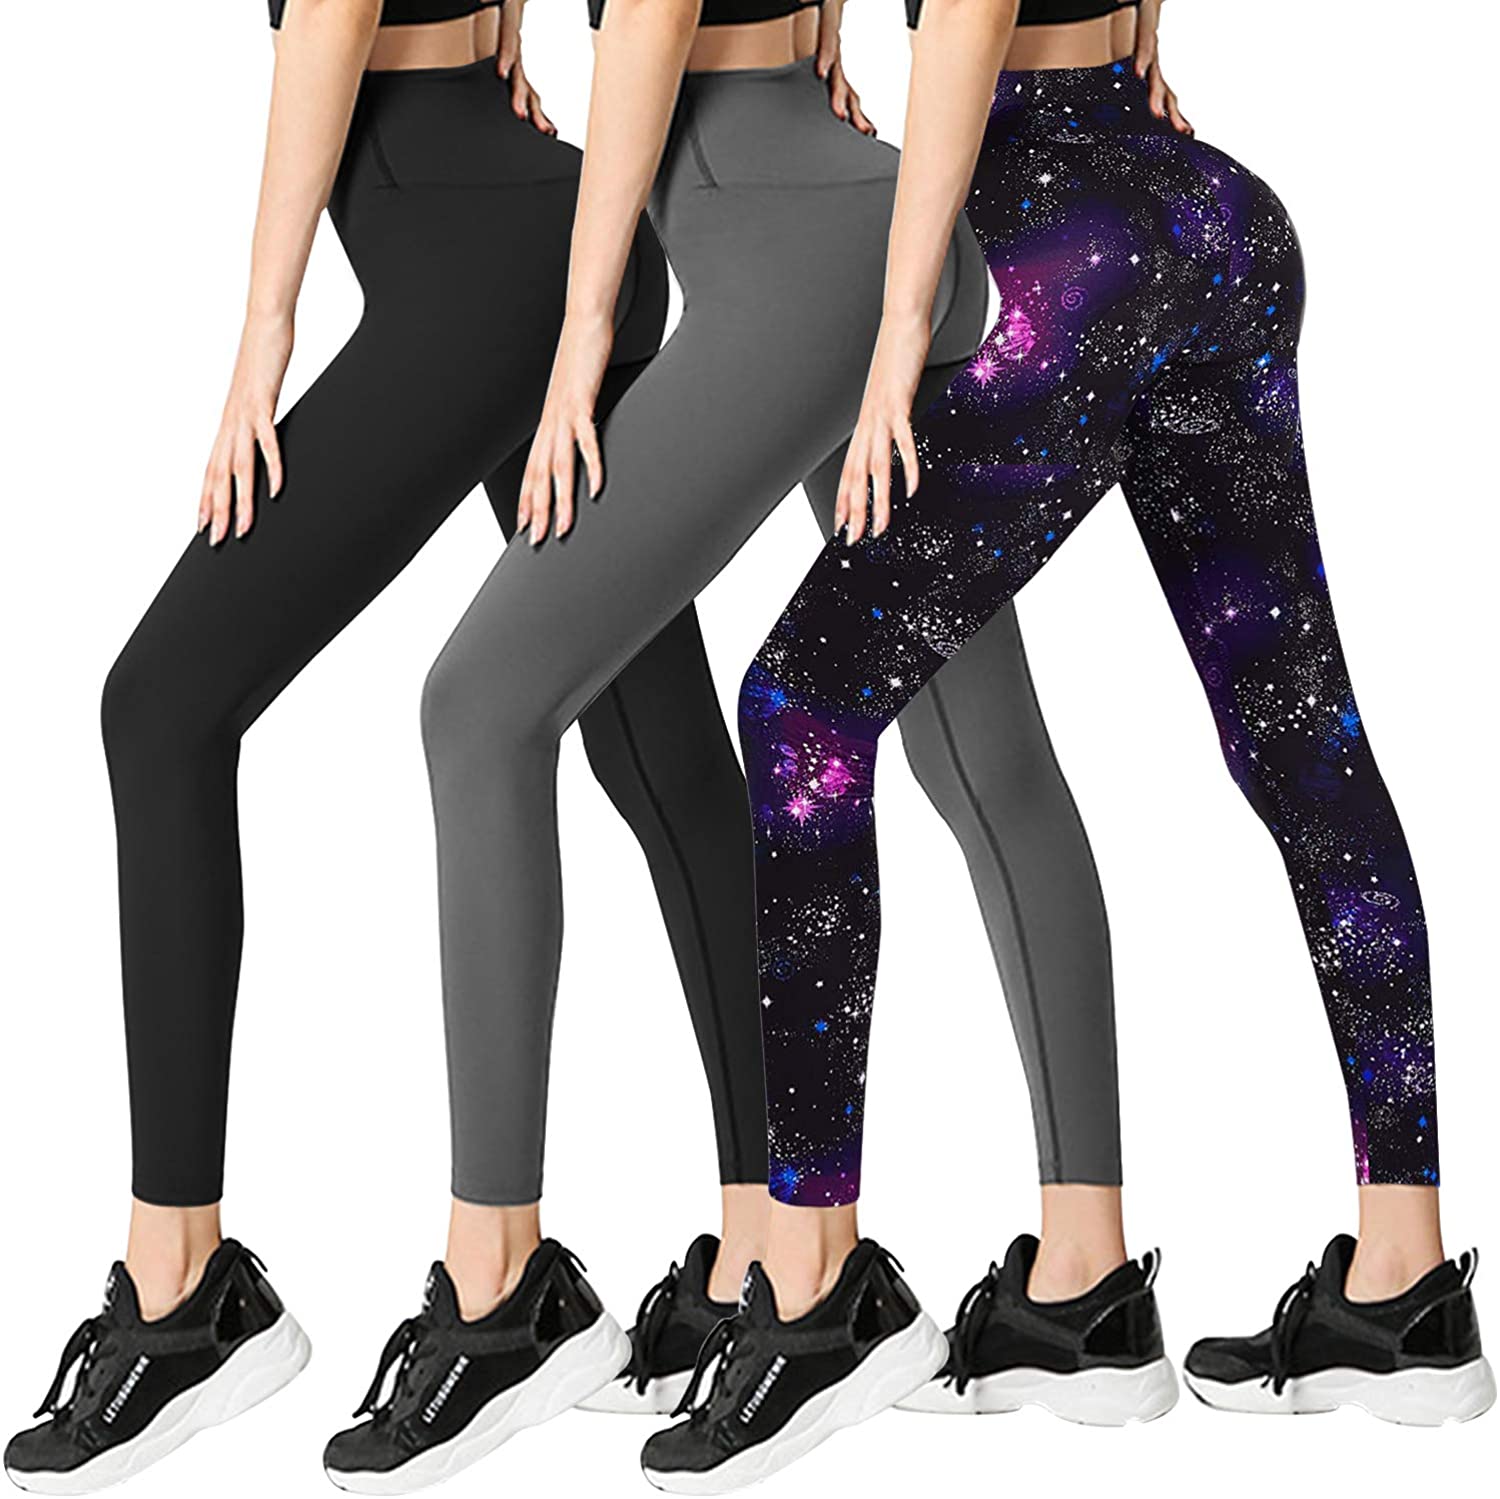  3 Pack Leggings For Women-No See-Through High